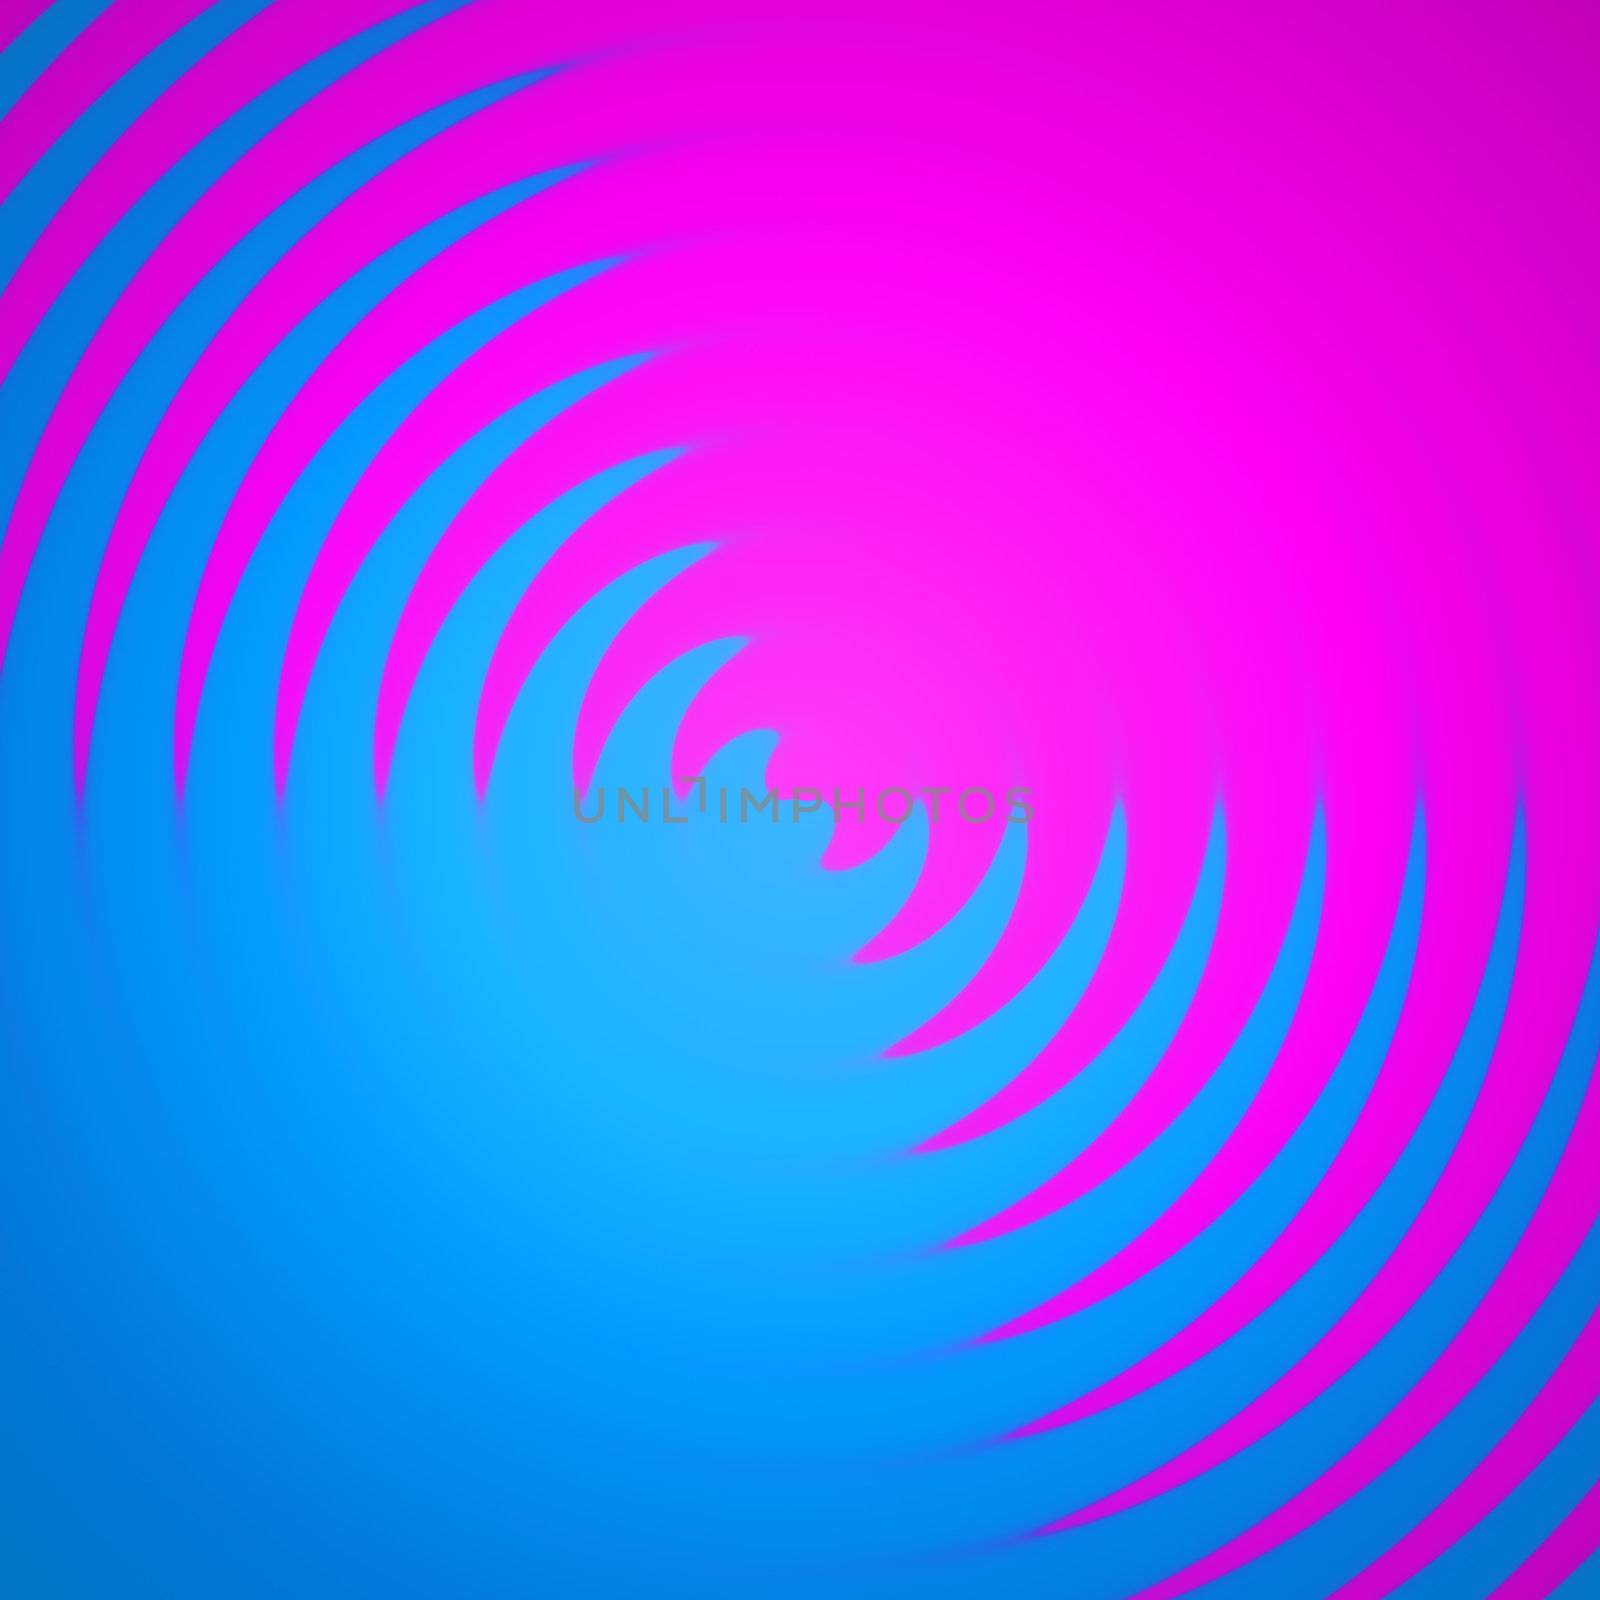 An abstract backdrop with pink and blue colors spiraling together. 